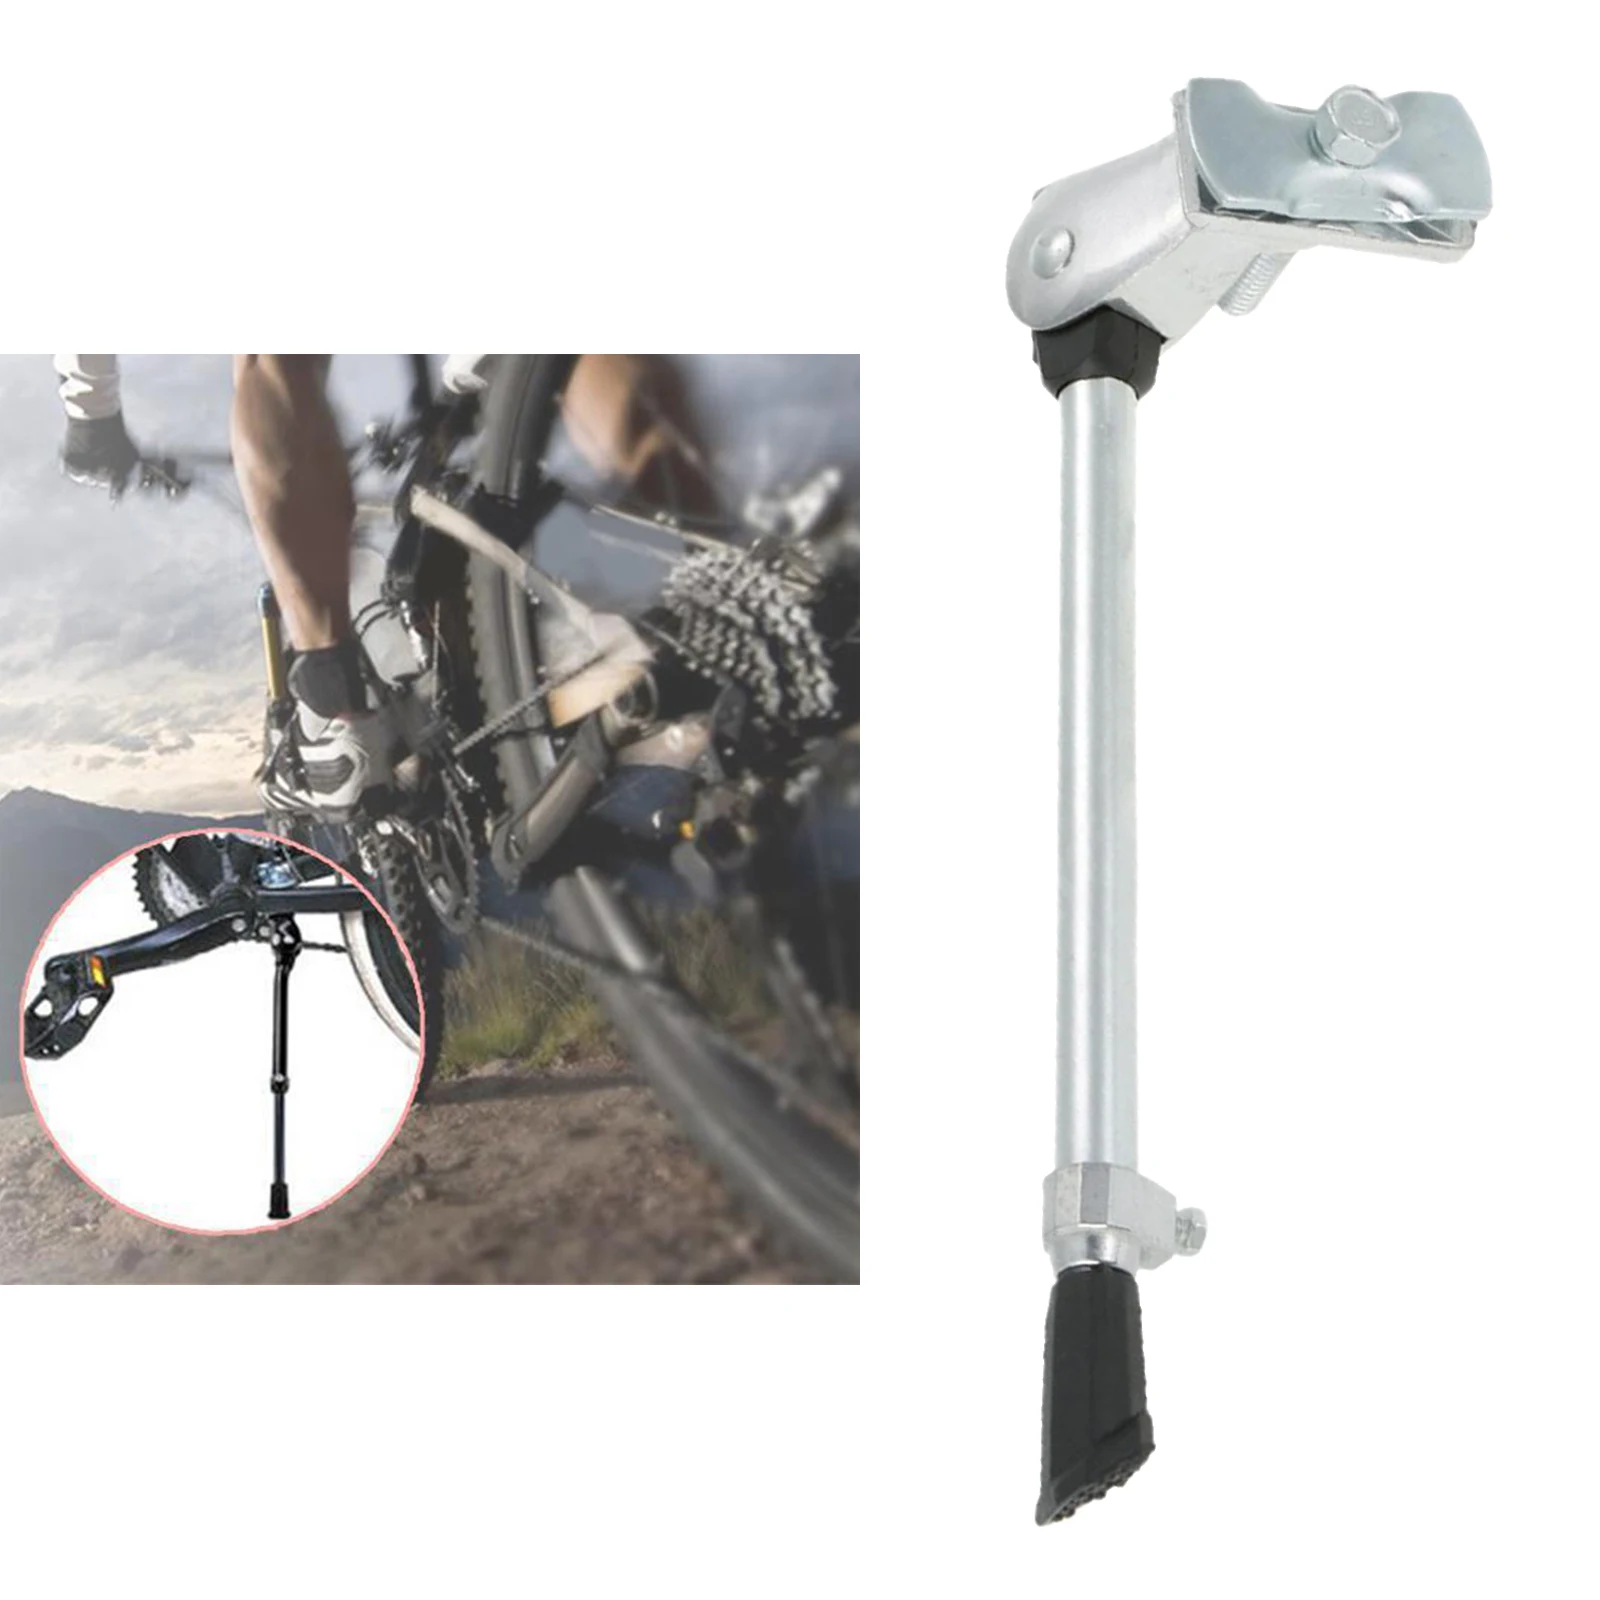 MTB Bike Kickstand Alloy Stable Rear Side Support Stand Prop Easy Install Single Leg for 24-27 inch Bicycle Parking